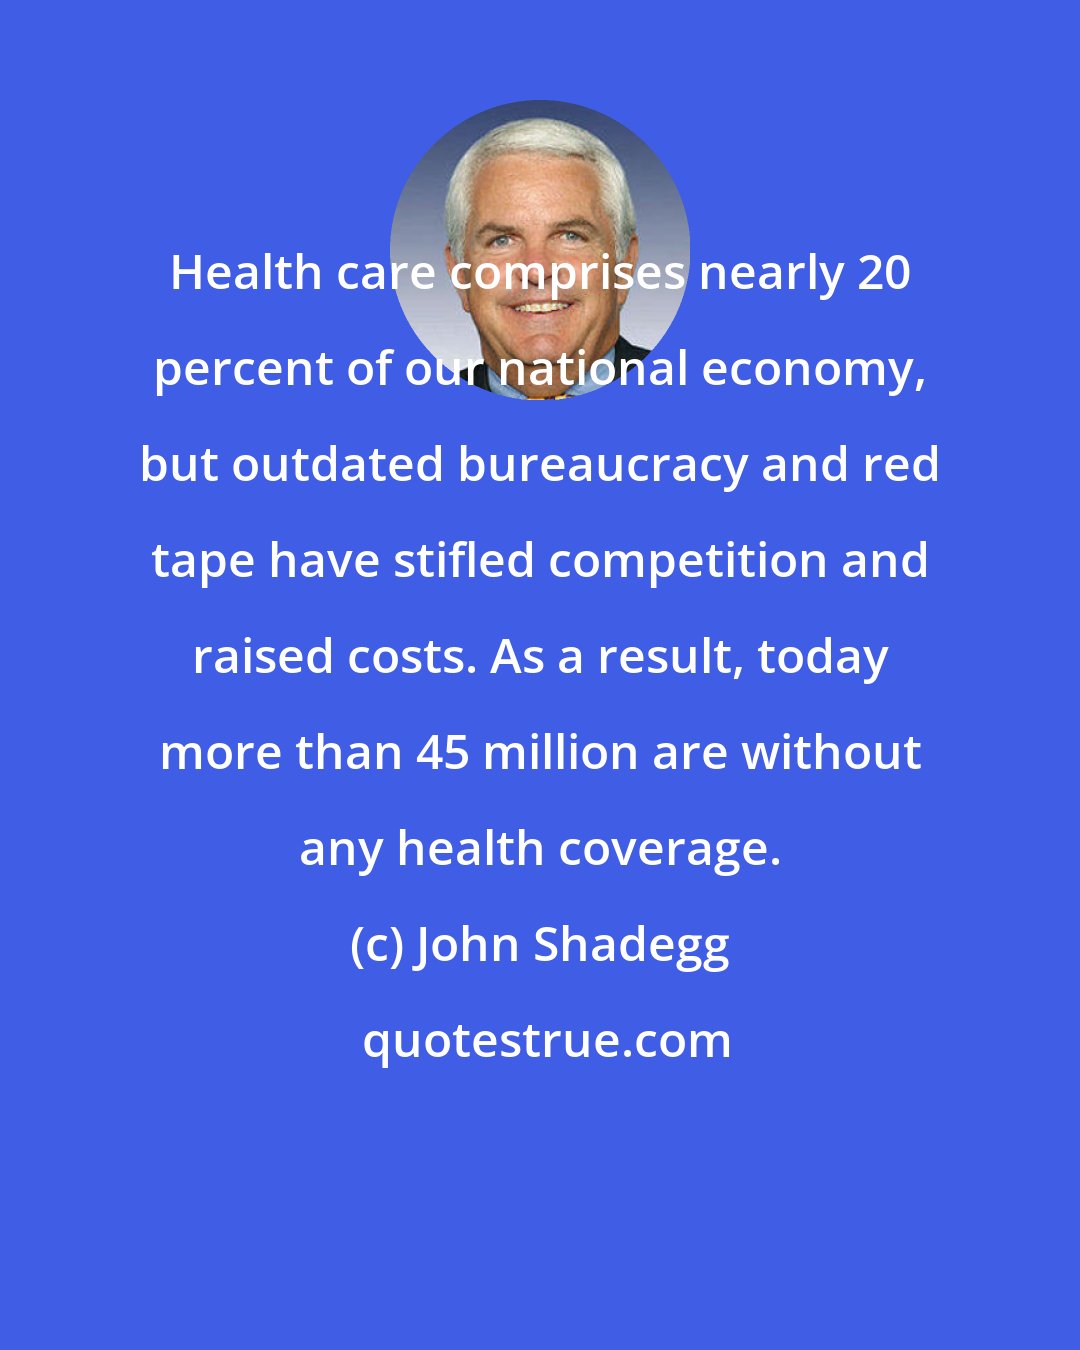 John Shadegg: Health care comprises nearly 20 percent of our national economy, but outdated bureaucracy and red tape have stifled competition and raised costs. As a result, today more than 45 million are without any health coverage.